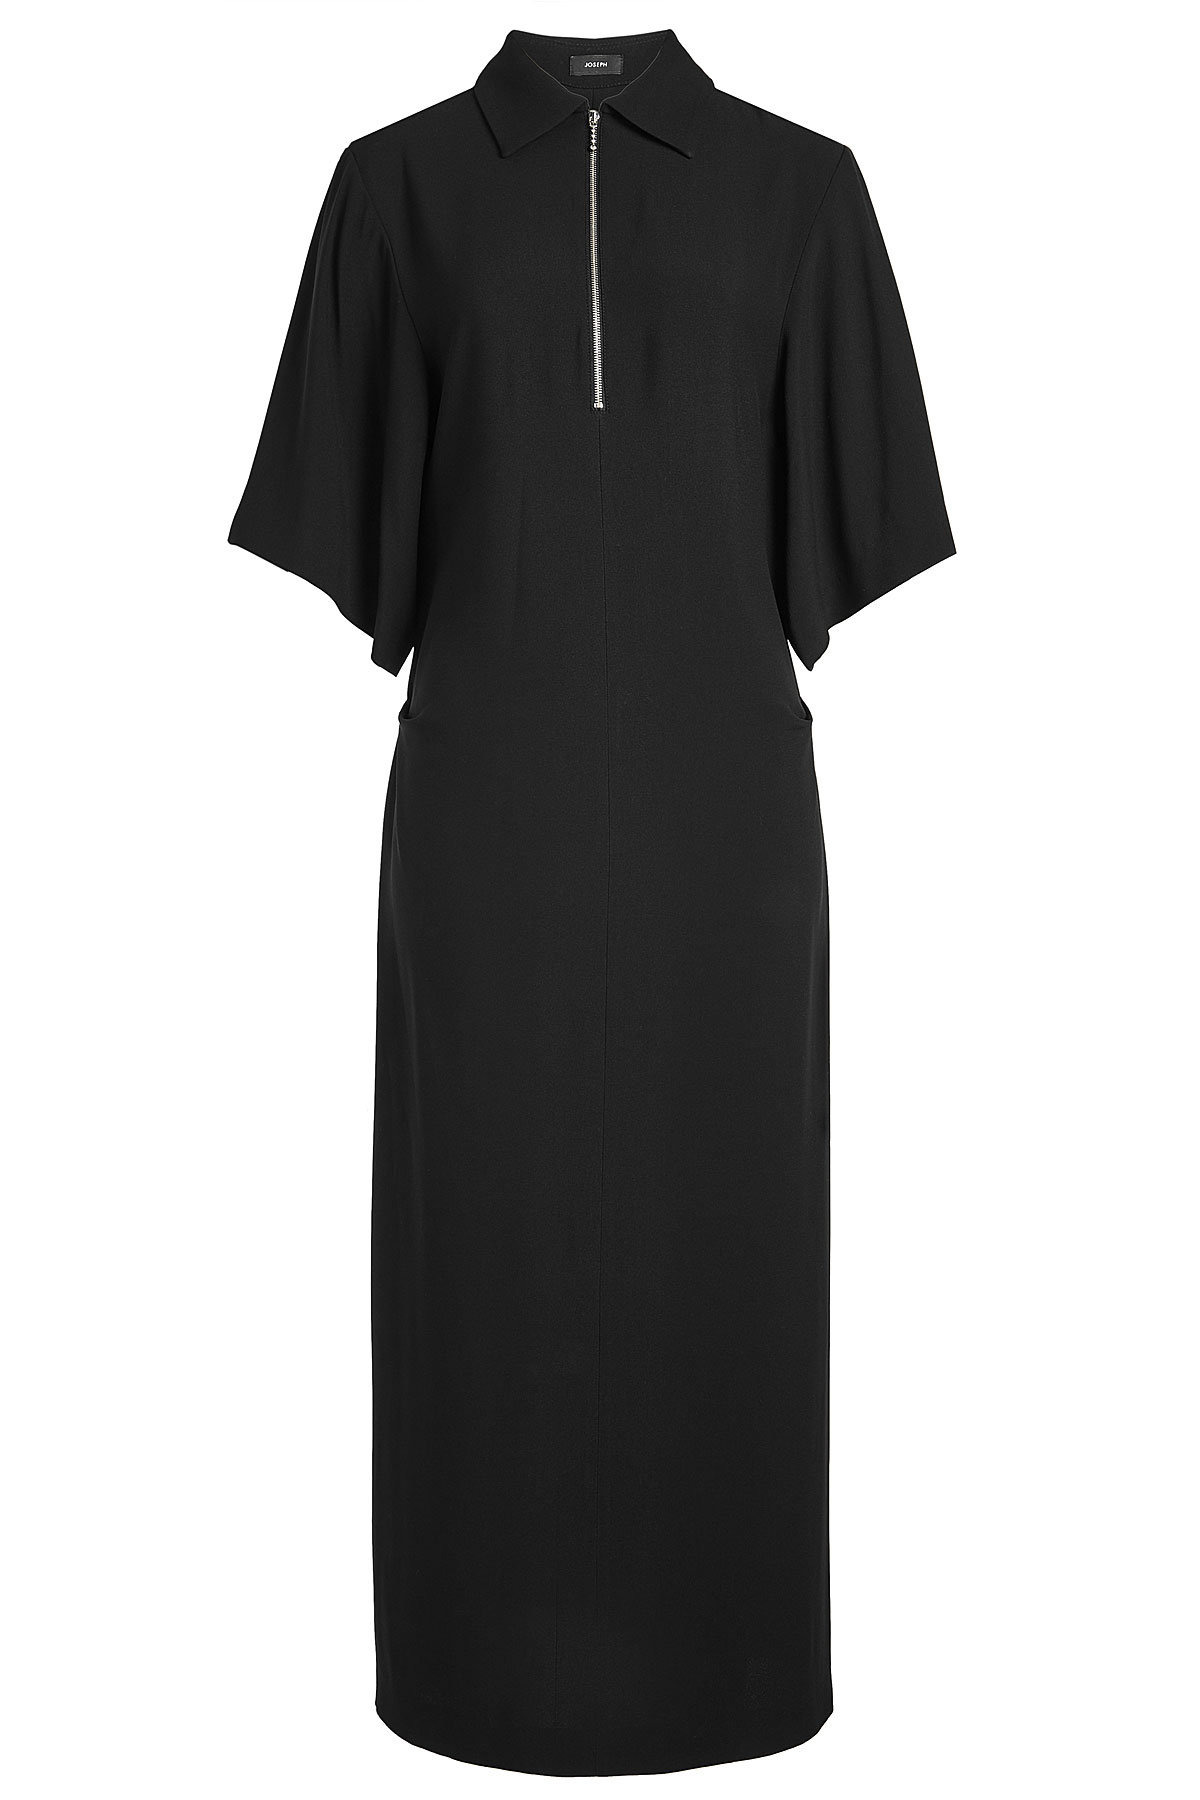 Fletcher Dress with Zipped Front by Joseph